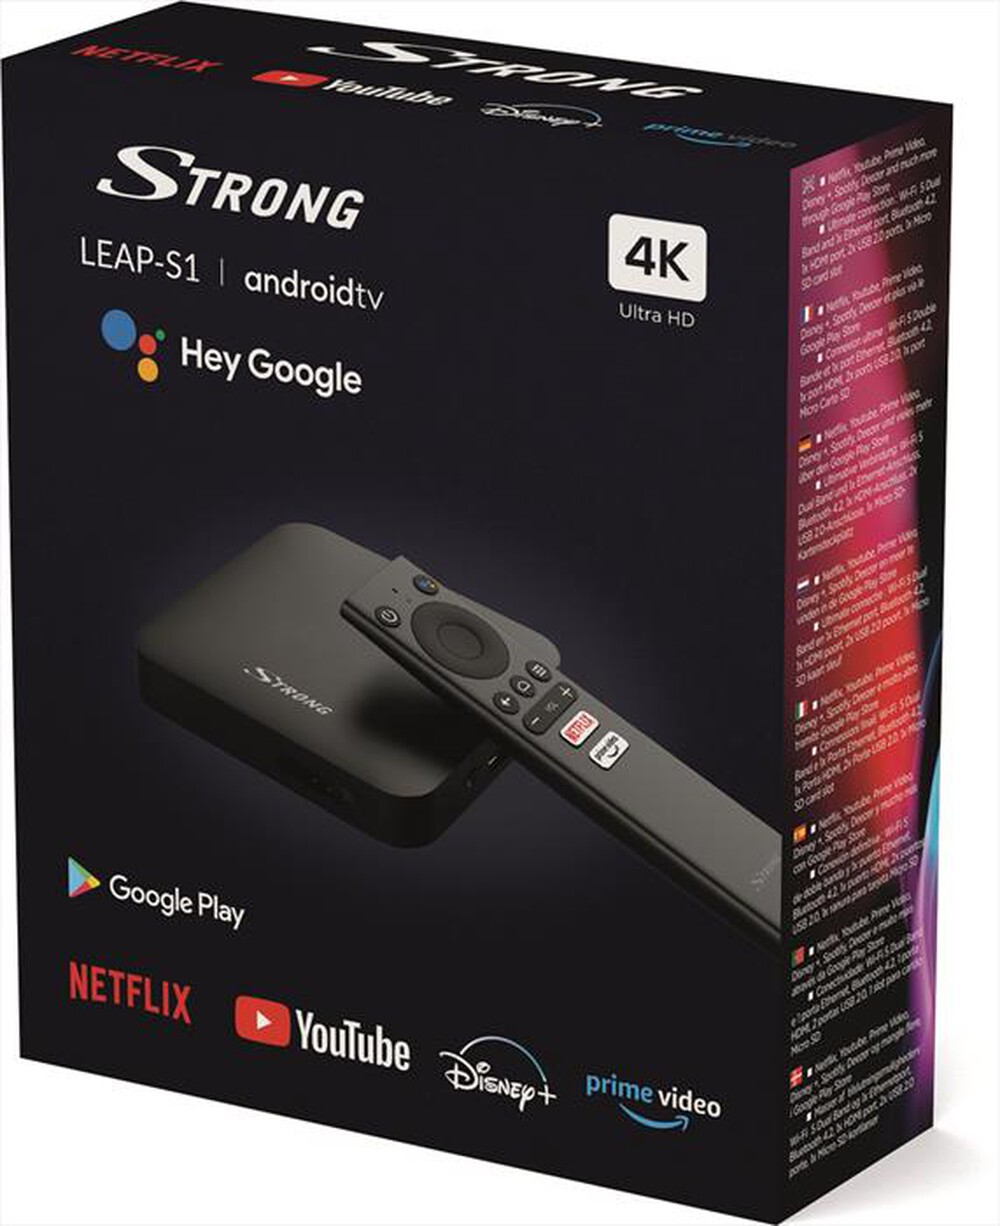 "STRONG - Android TV box 4K Ultra HD streaming SRT LEAP-S1-Nero"